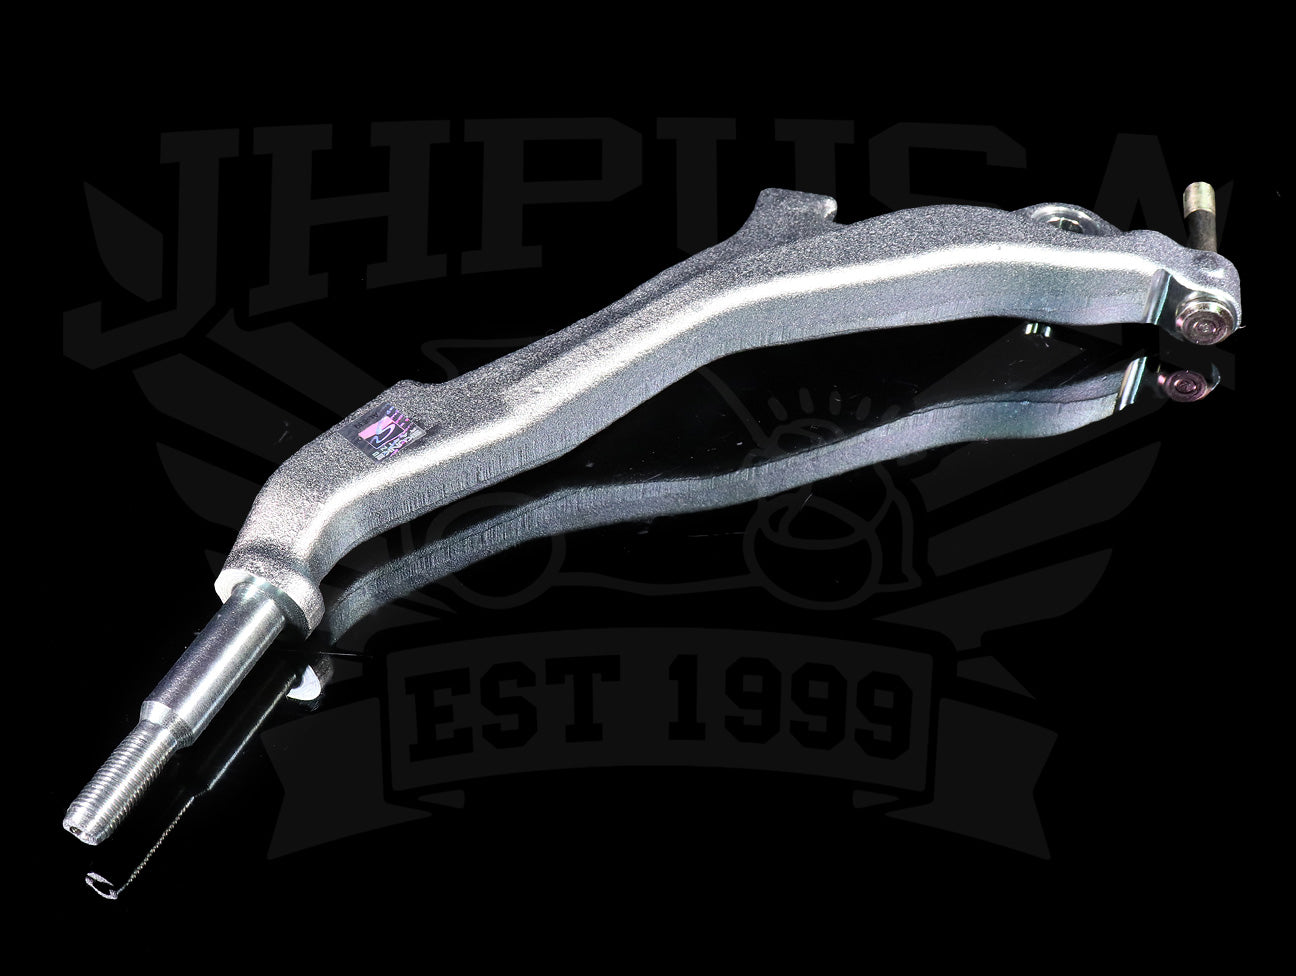 Skunk2 Front Lower Compliance Arms - 96-00 Civic (Non-Si)